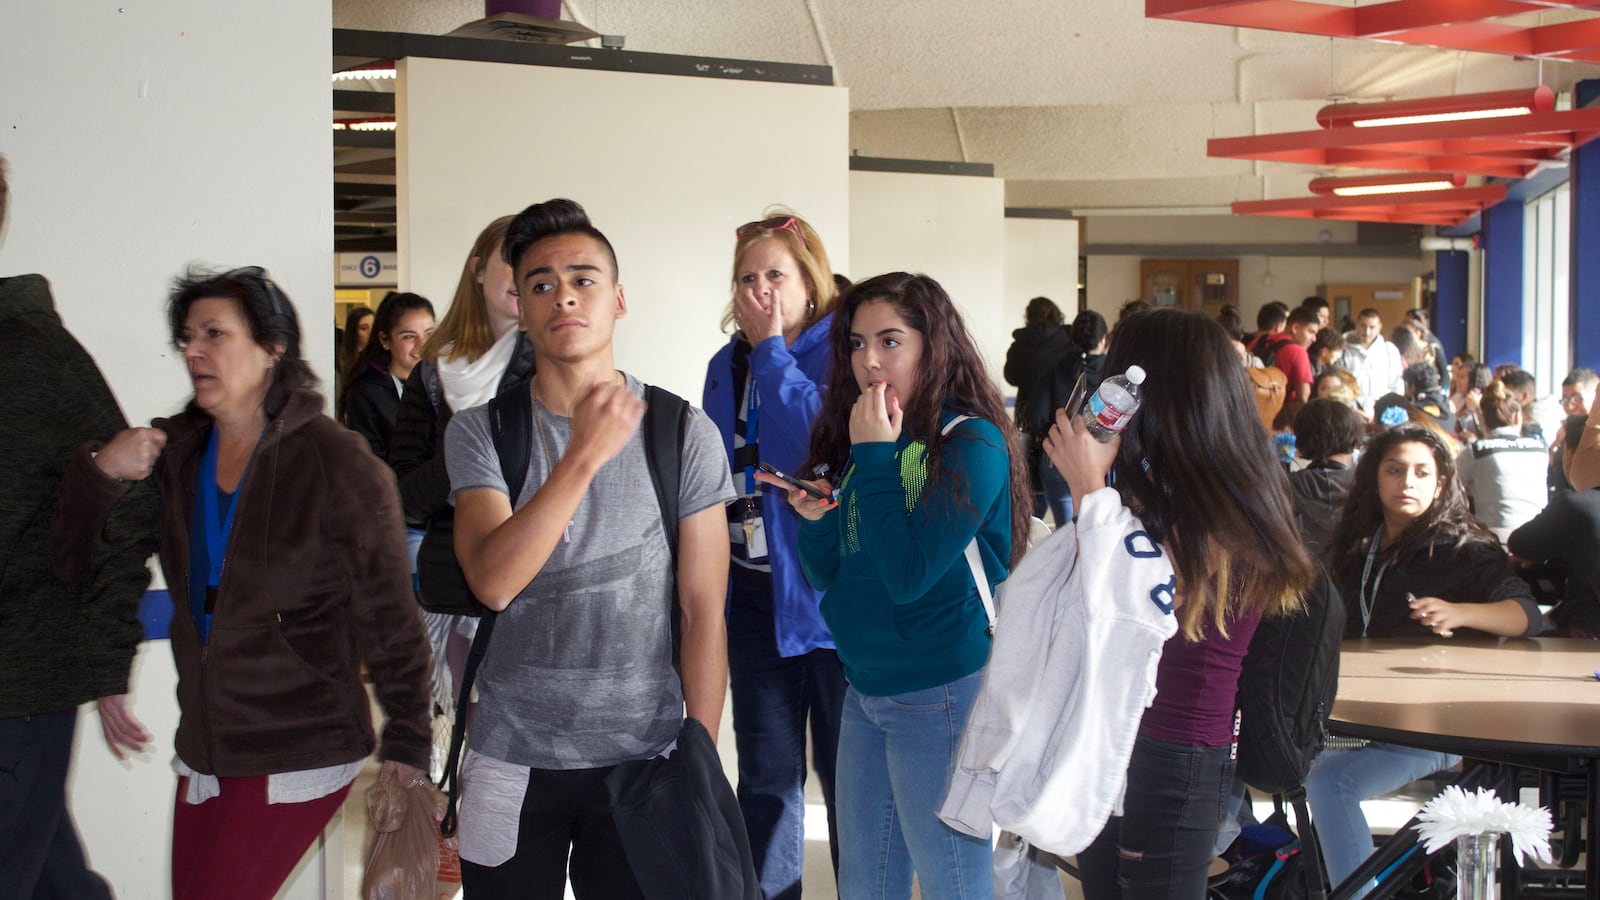 Students move through the crowded cafeteria at Jeffco Public Schools' Alameda International Junior/Senior High School in Lakewood.